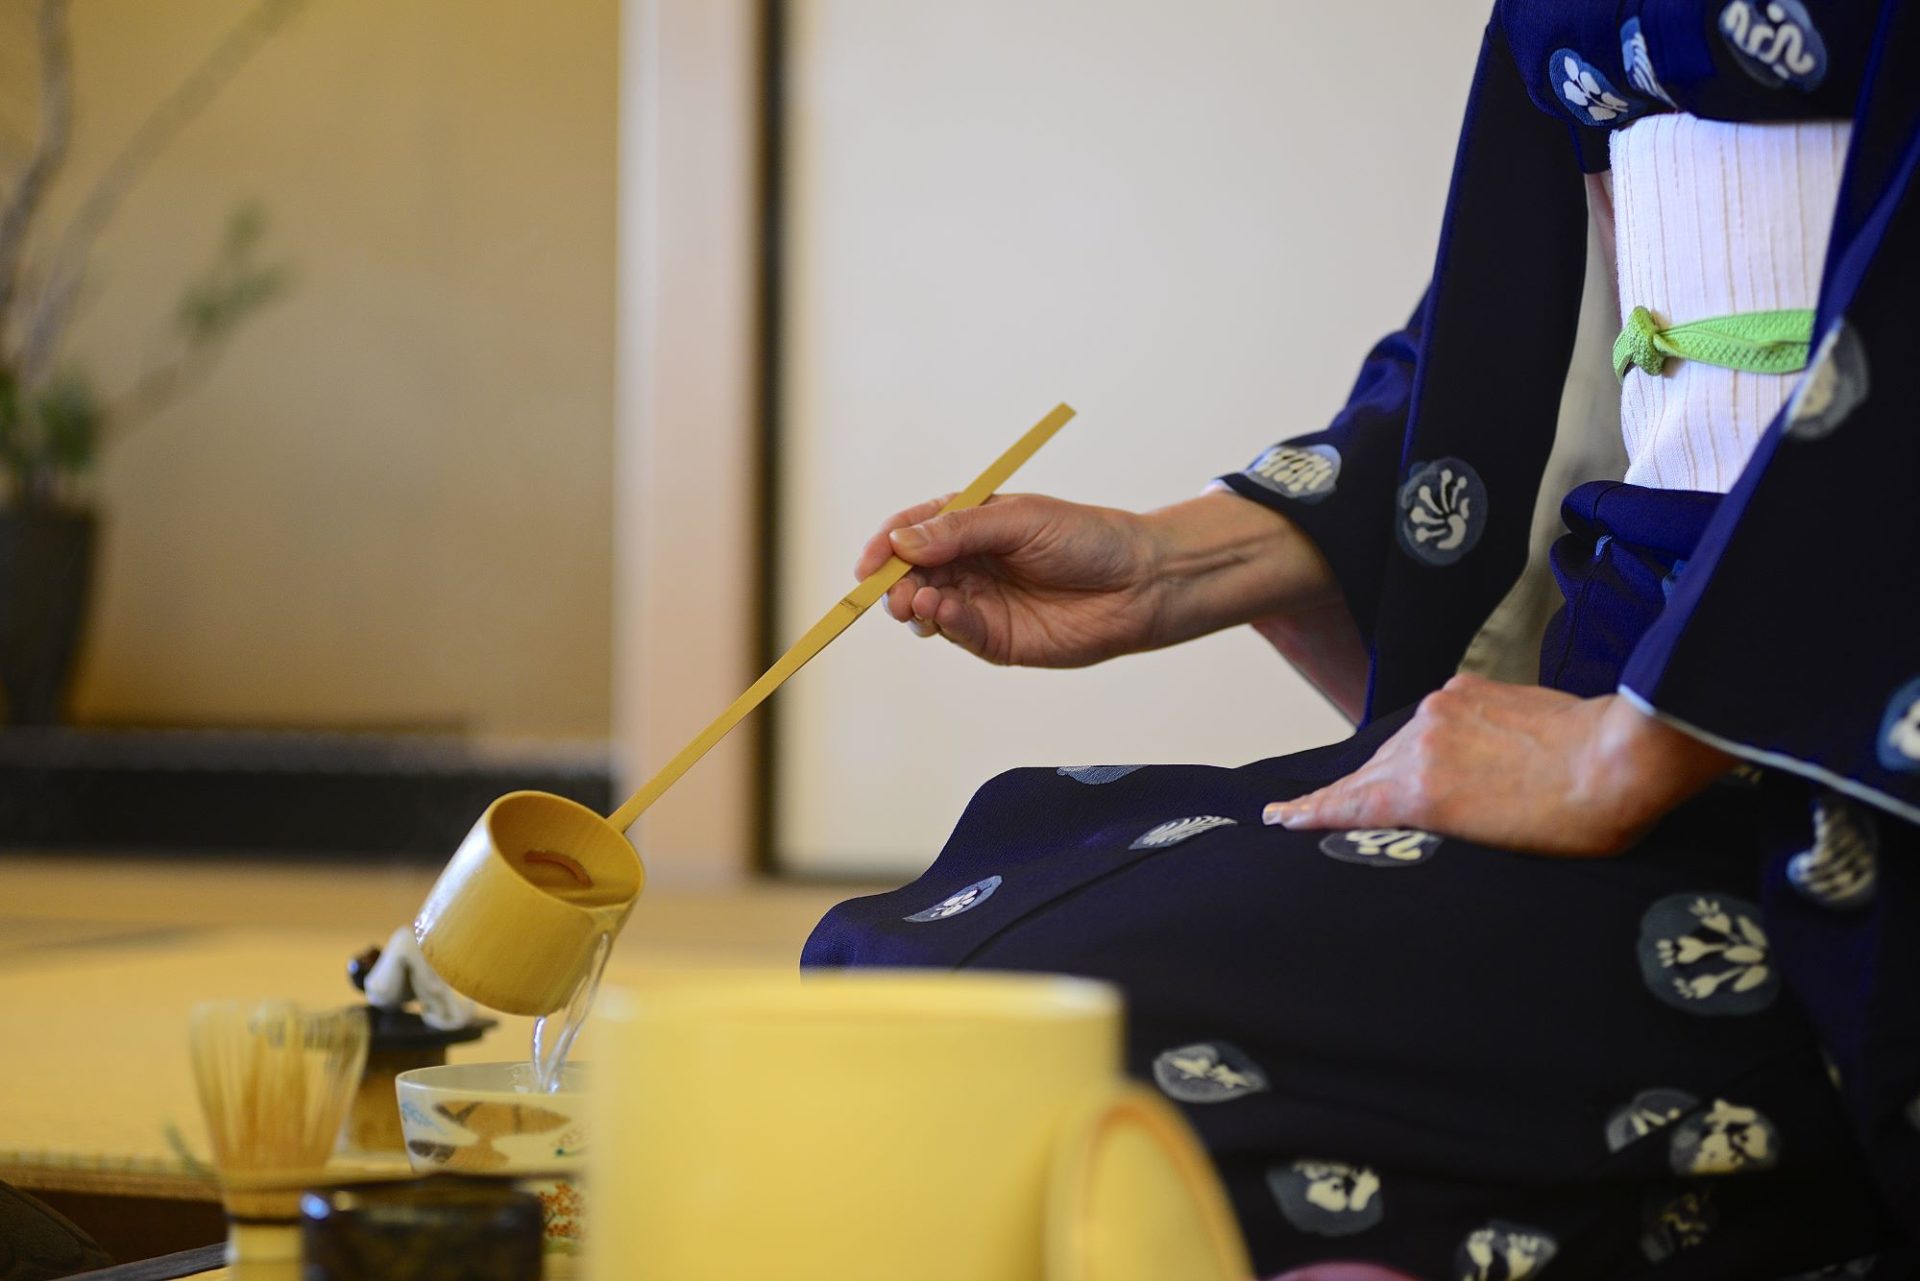 Try a tea ceremony at Japan House this spring